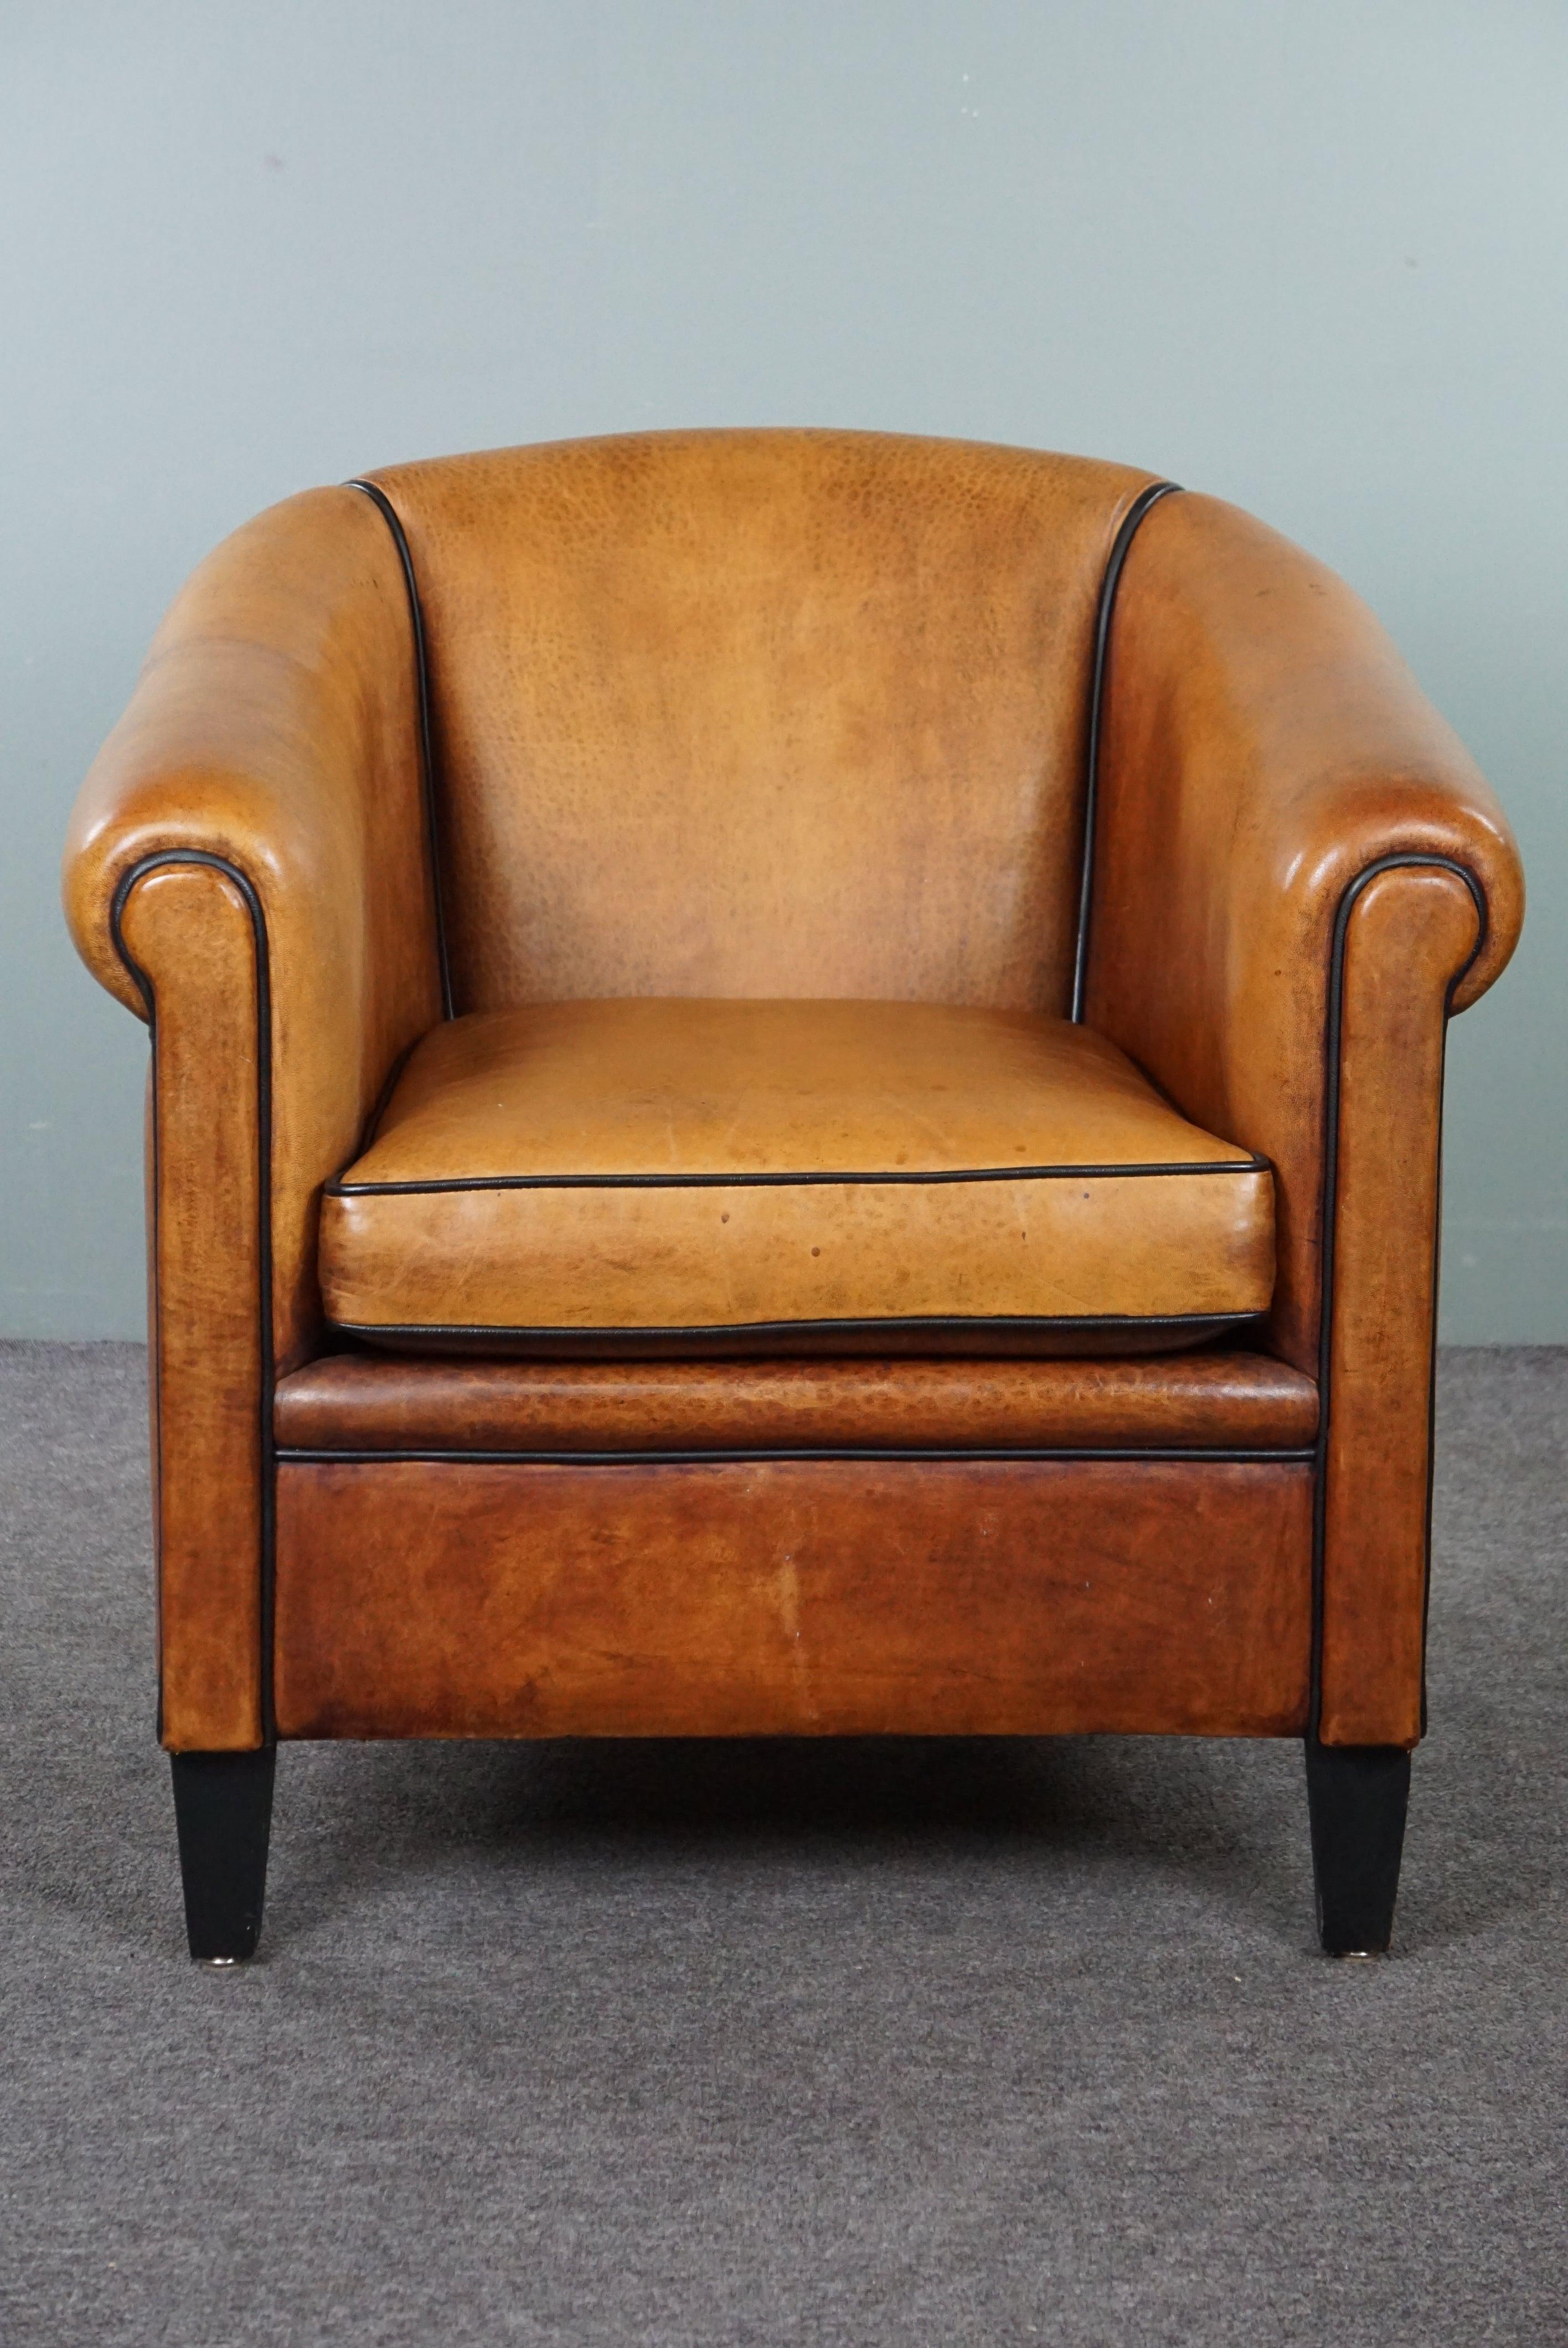 Offered is this elegant and well-maintained sheep leather club armchair. Here, we present to you a high-quality and stunning sheep leather club armchair. This armchair is in good condition and provides a wonderfully comfortable seat. With its